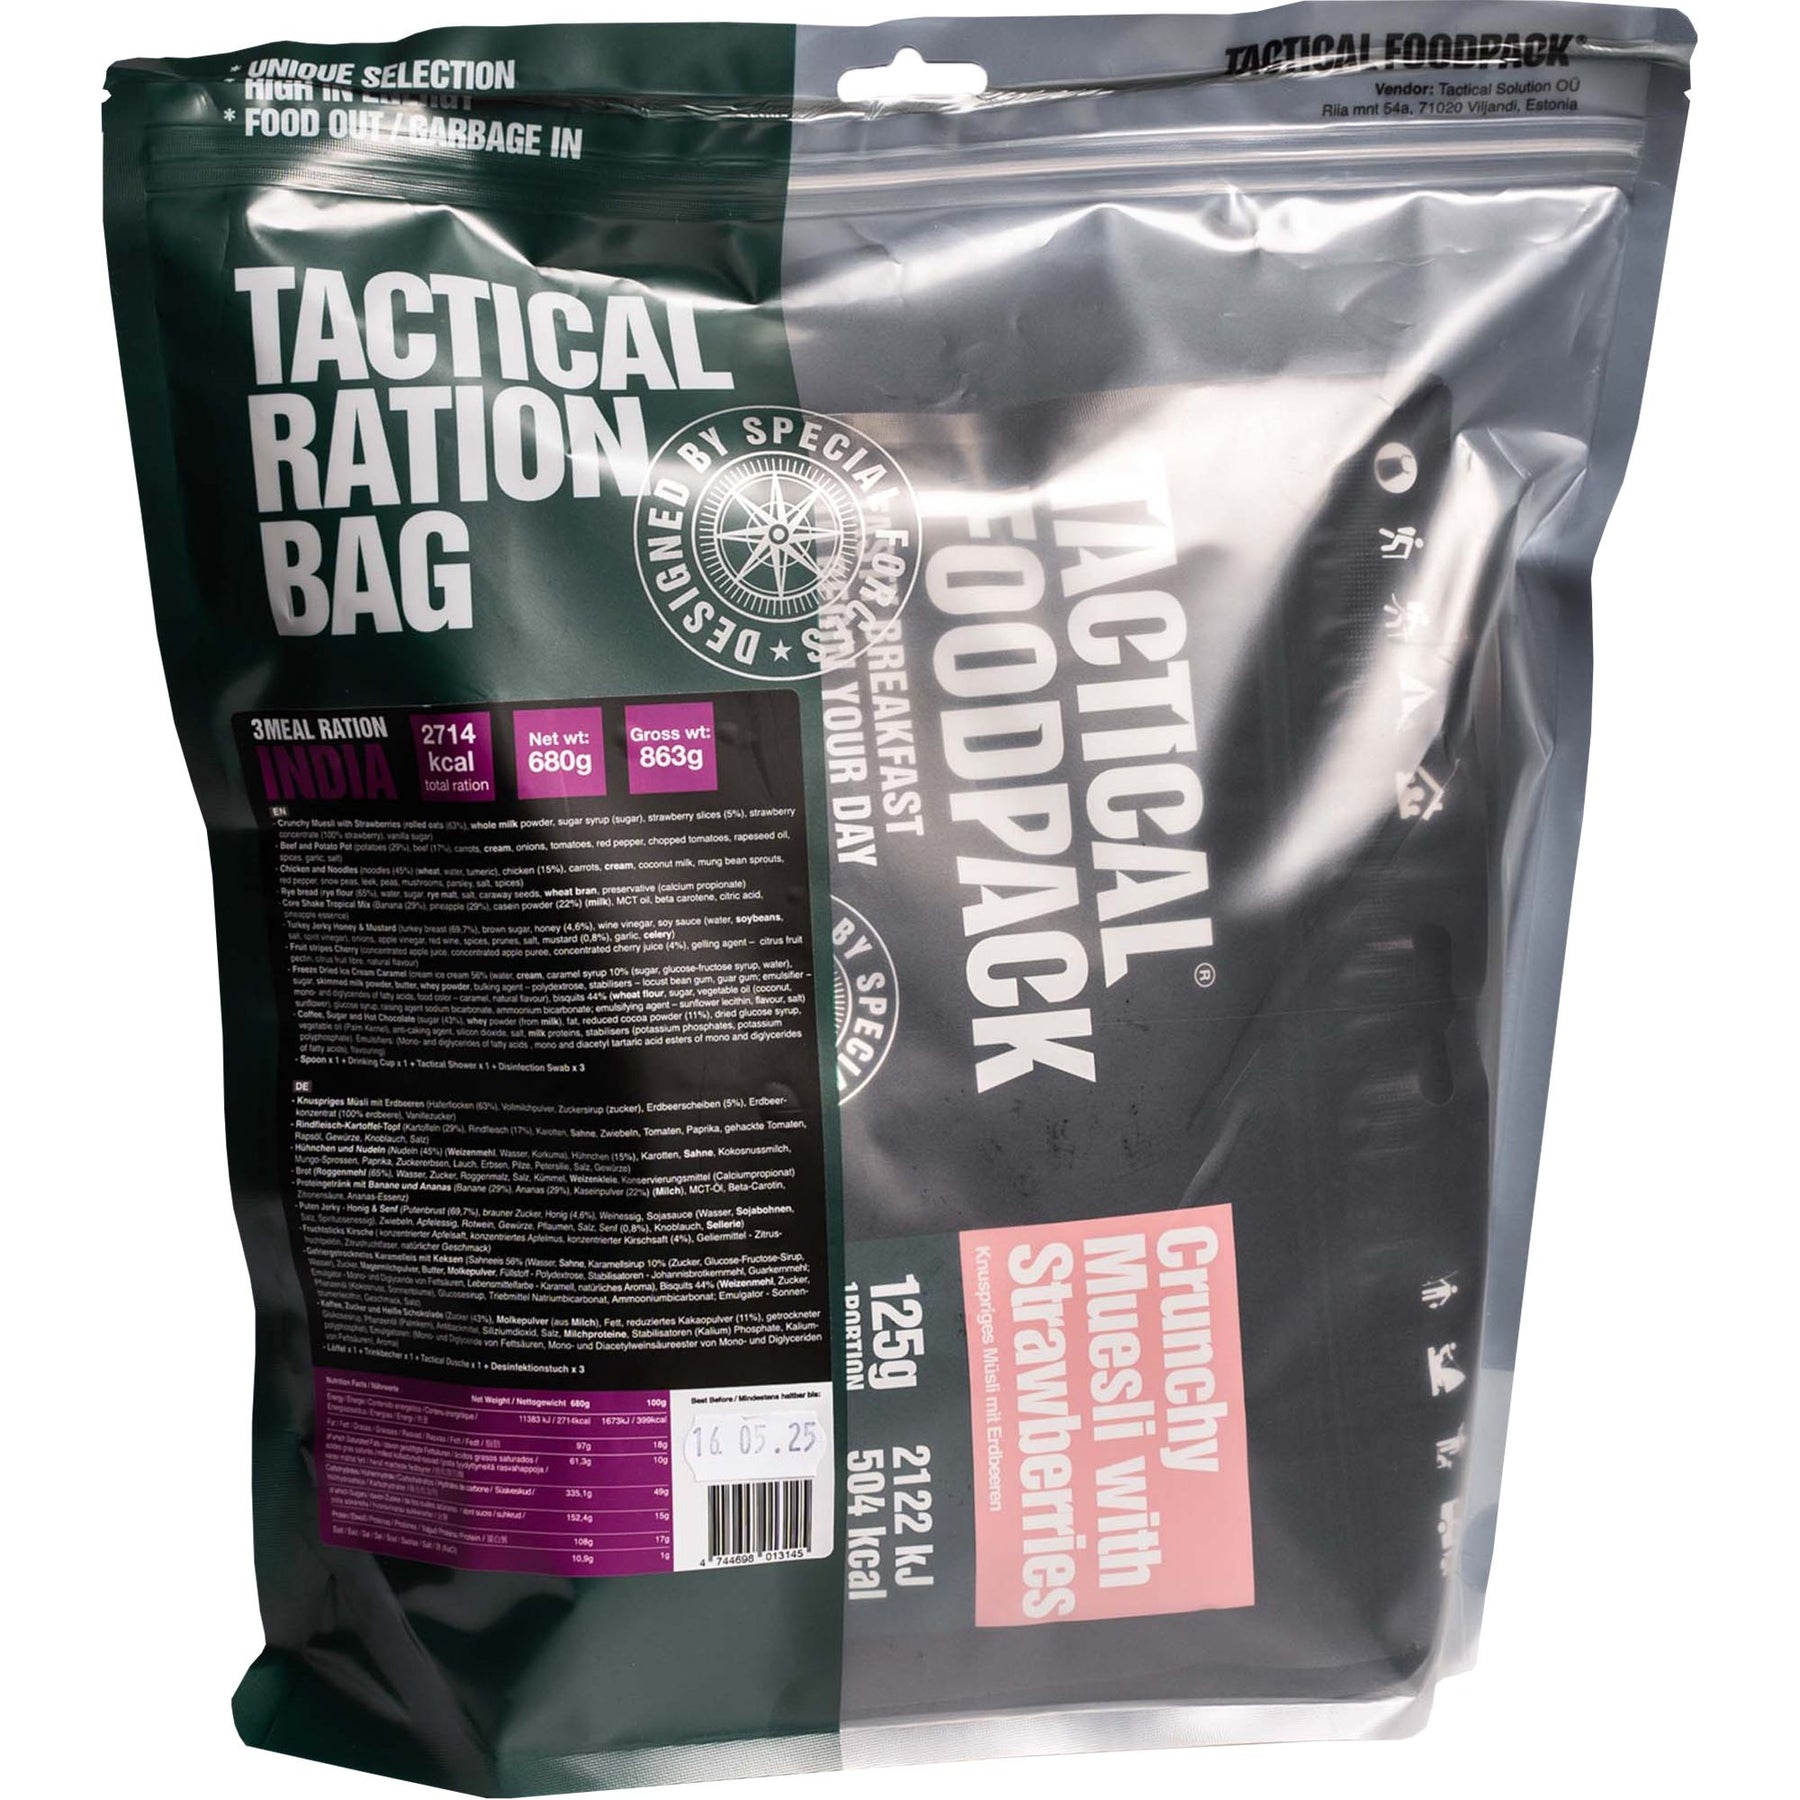 Tactical Foodpack | 3 Meal Ration INDIA 710g